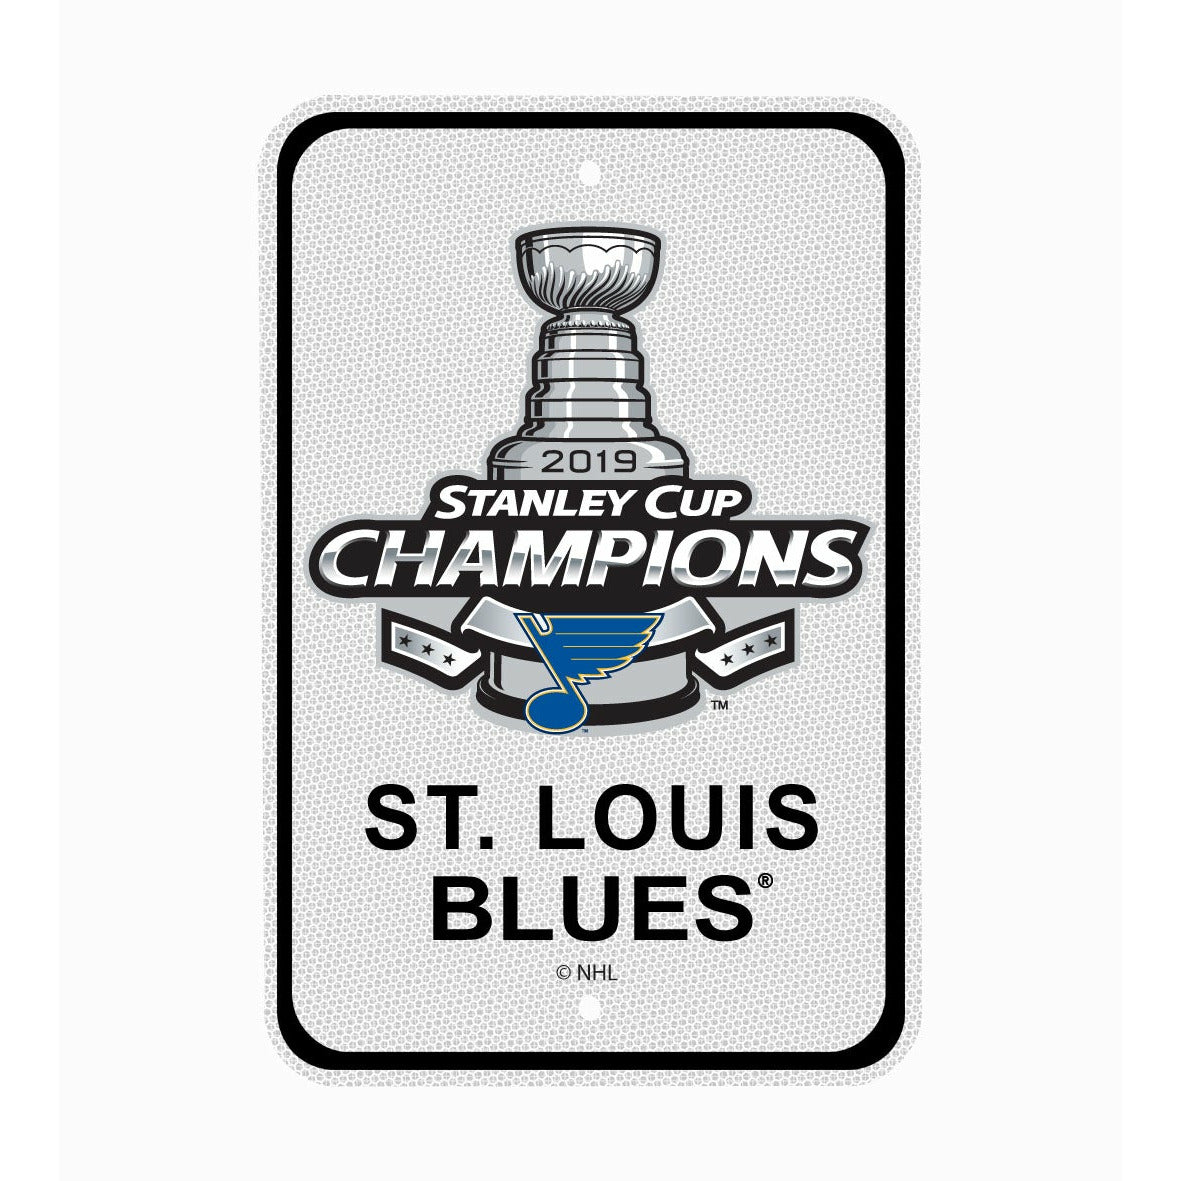 St. Louis Blues Wall Decorations, Blues Street Signs, St. Louis